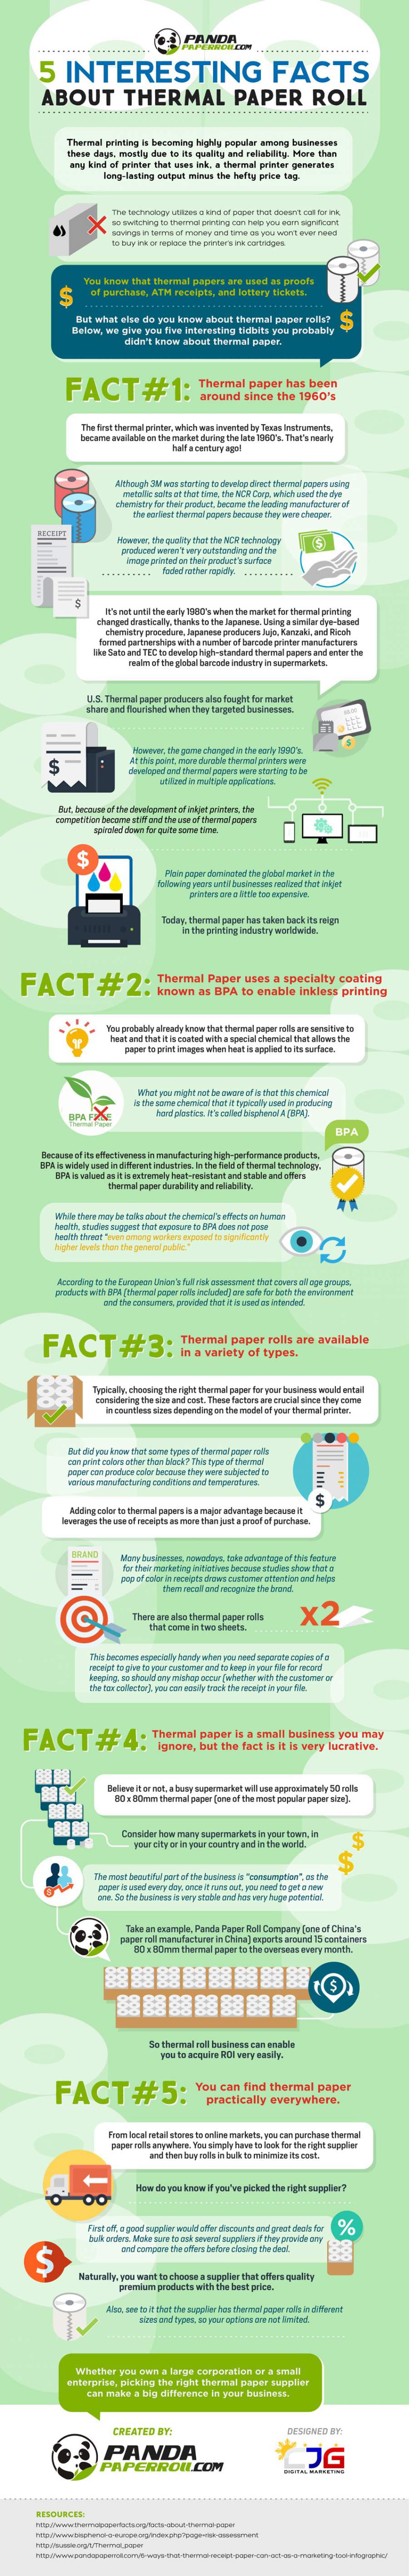 About Thermal Paper Roll